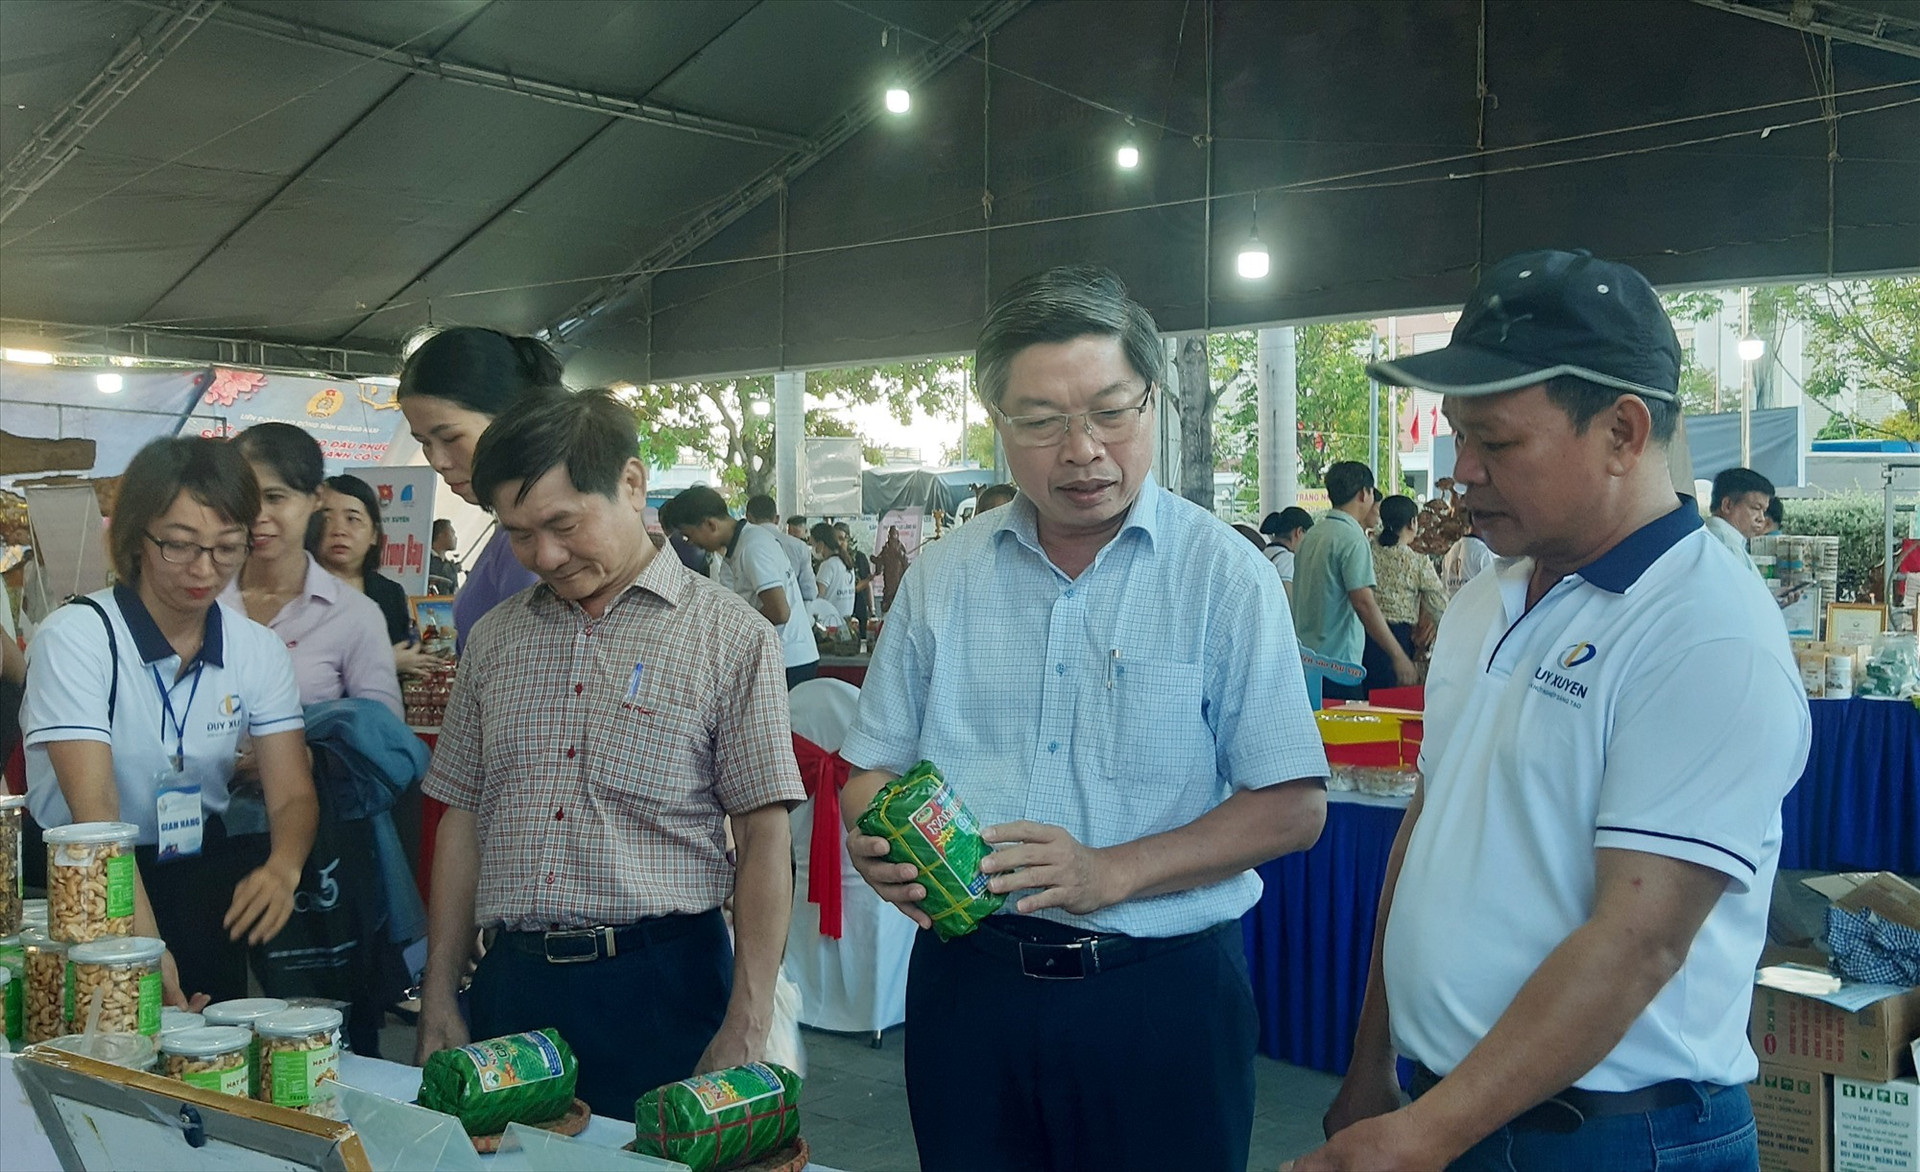 Quang Nam and Duy Xuyen leaders visit the booths at the festival.